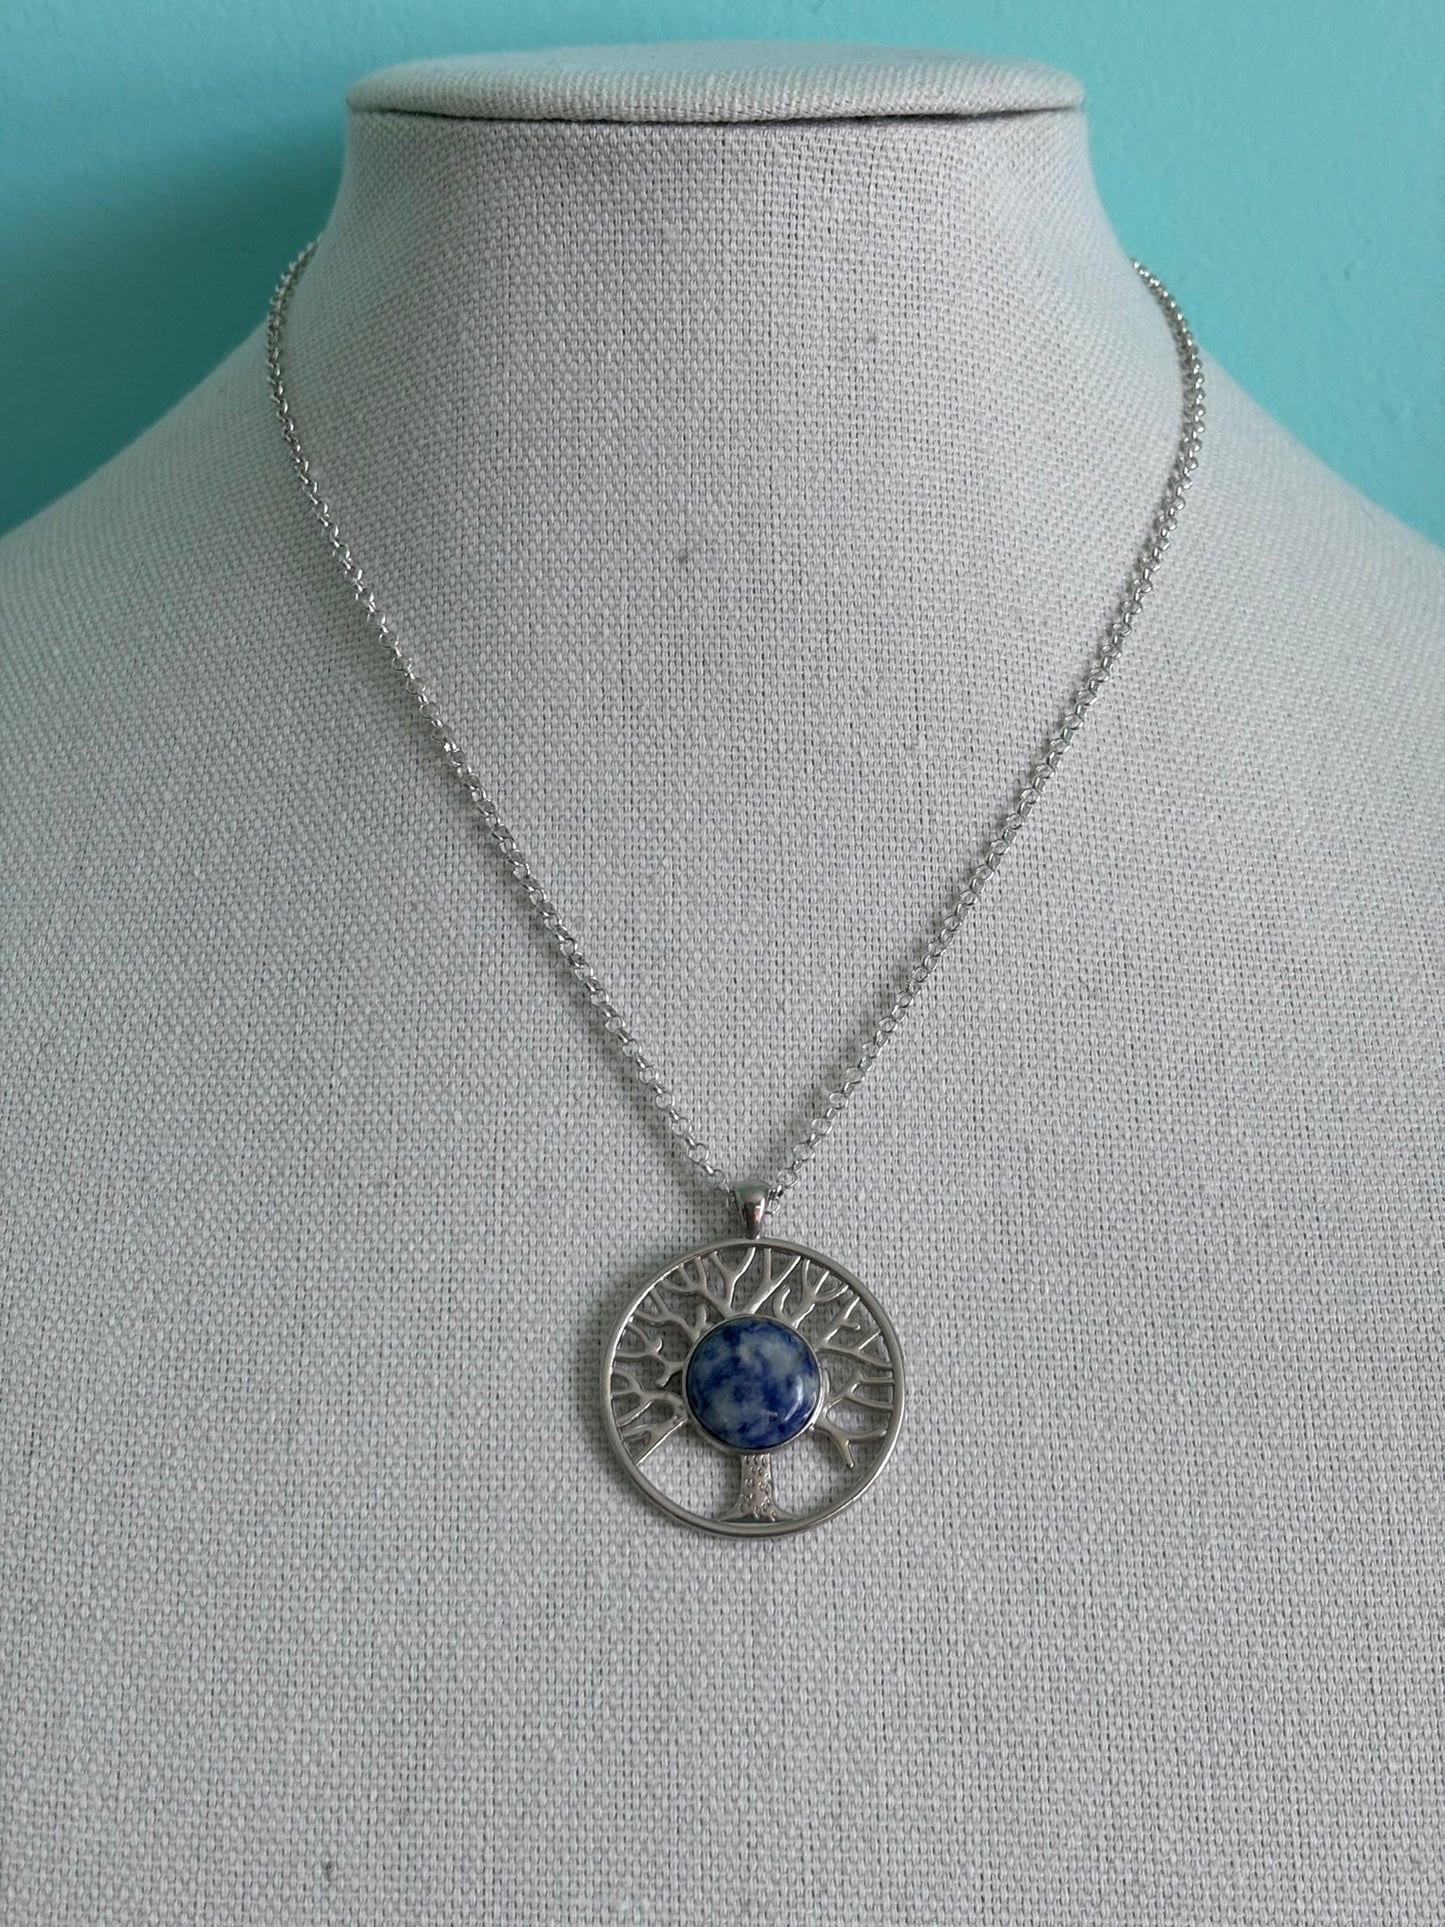 Blue Sodalite Tree of Life Necklace